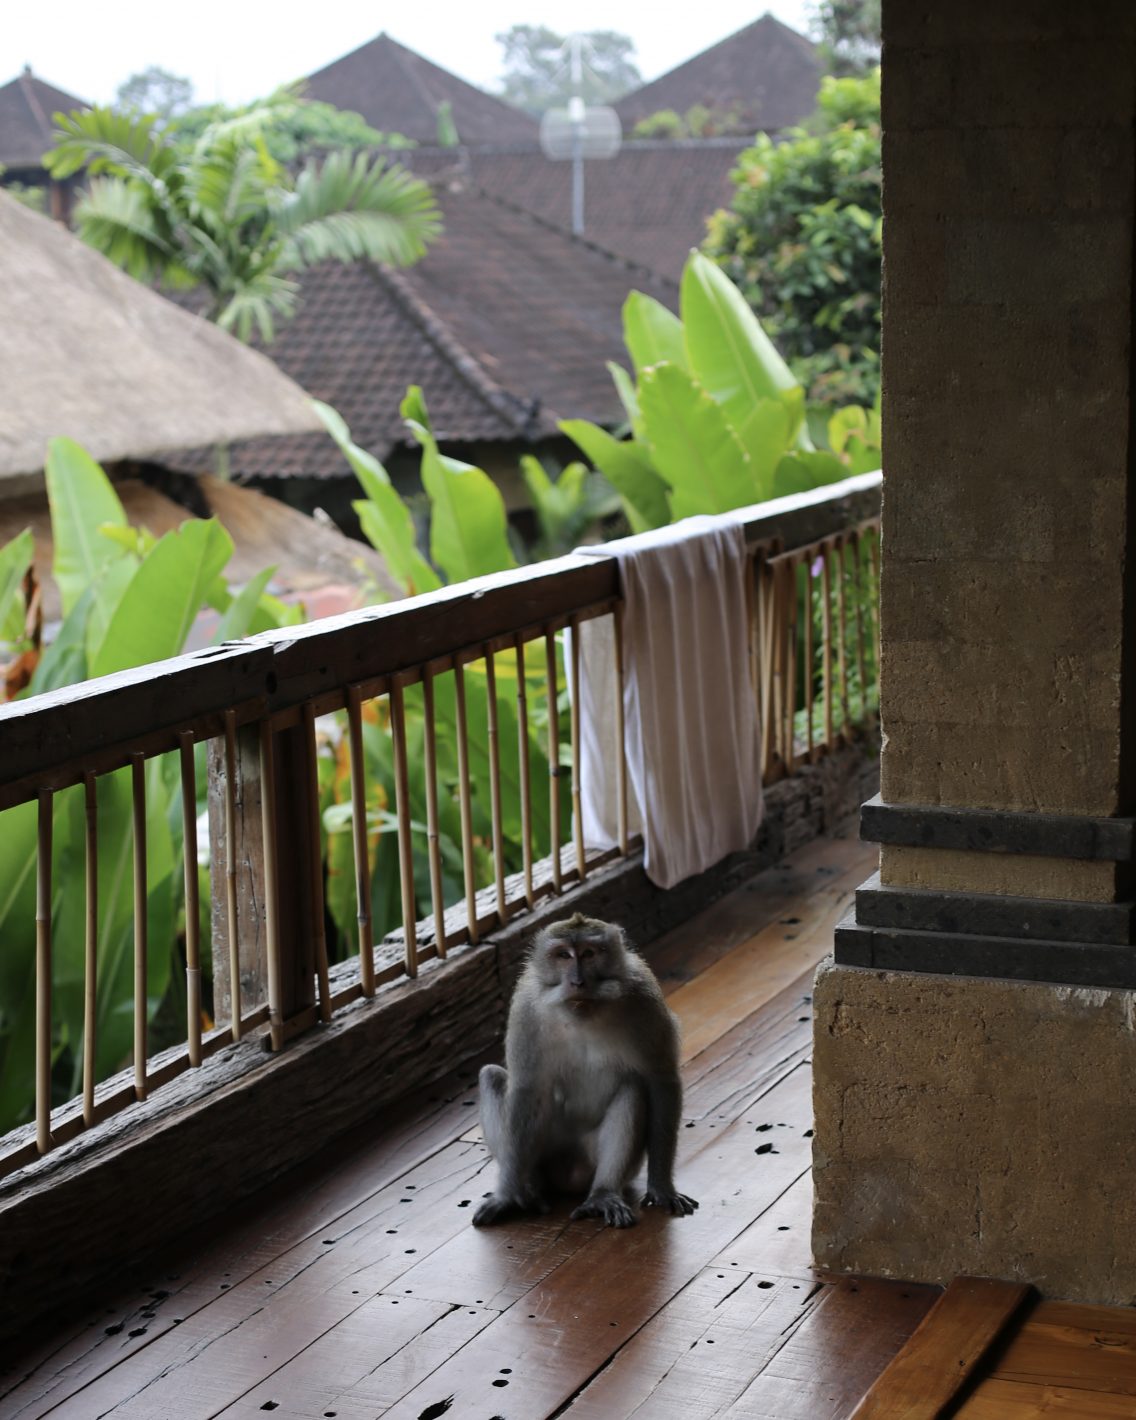 The first image I had of the macaque at home